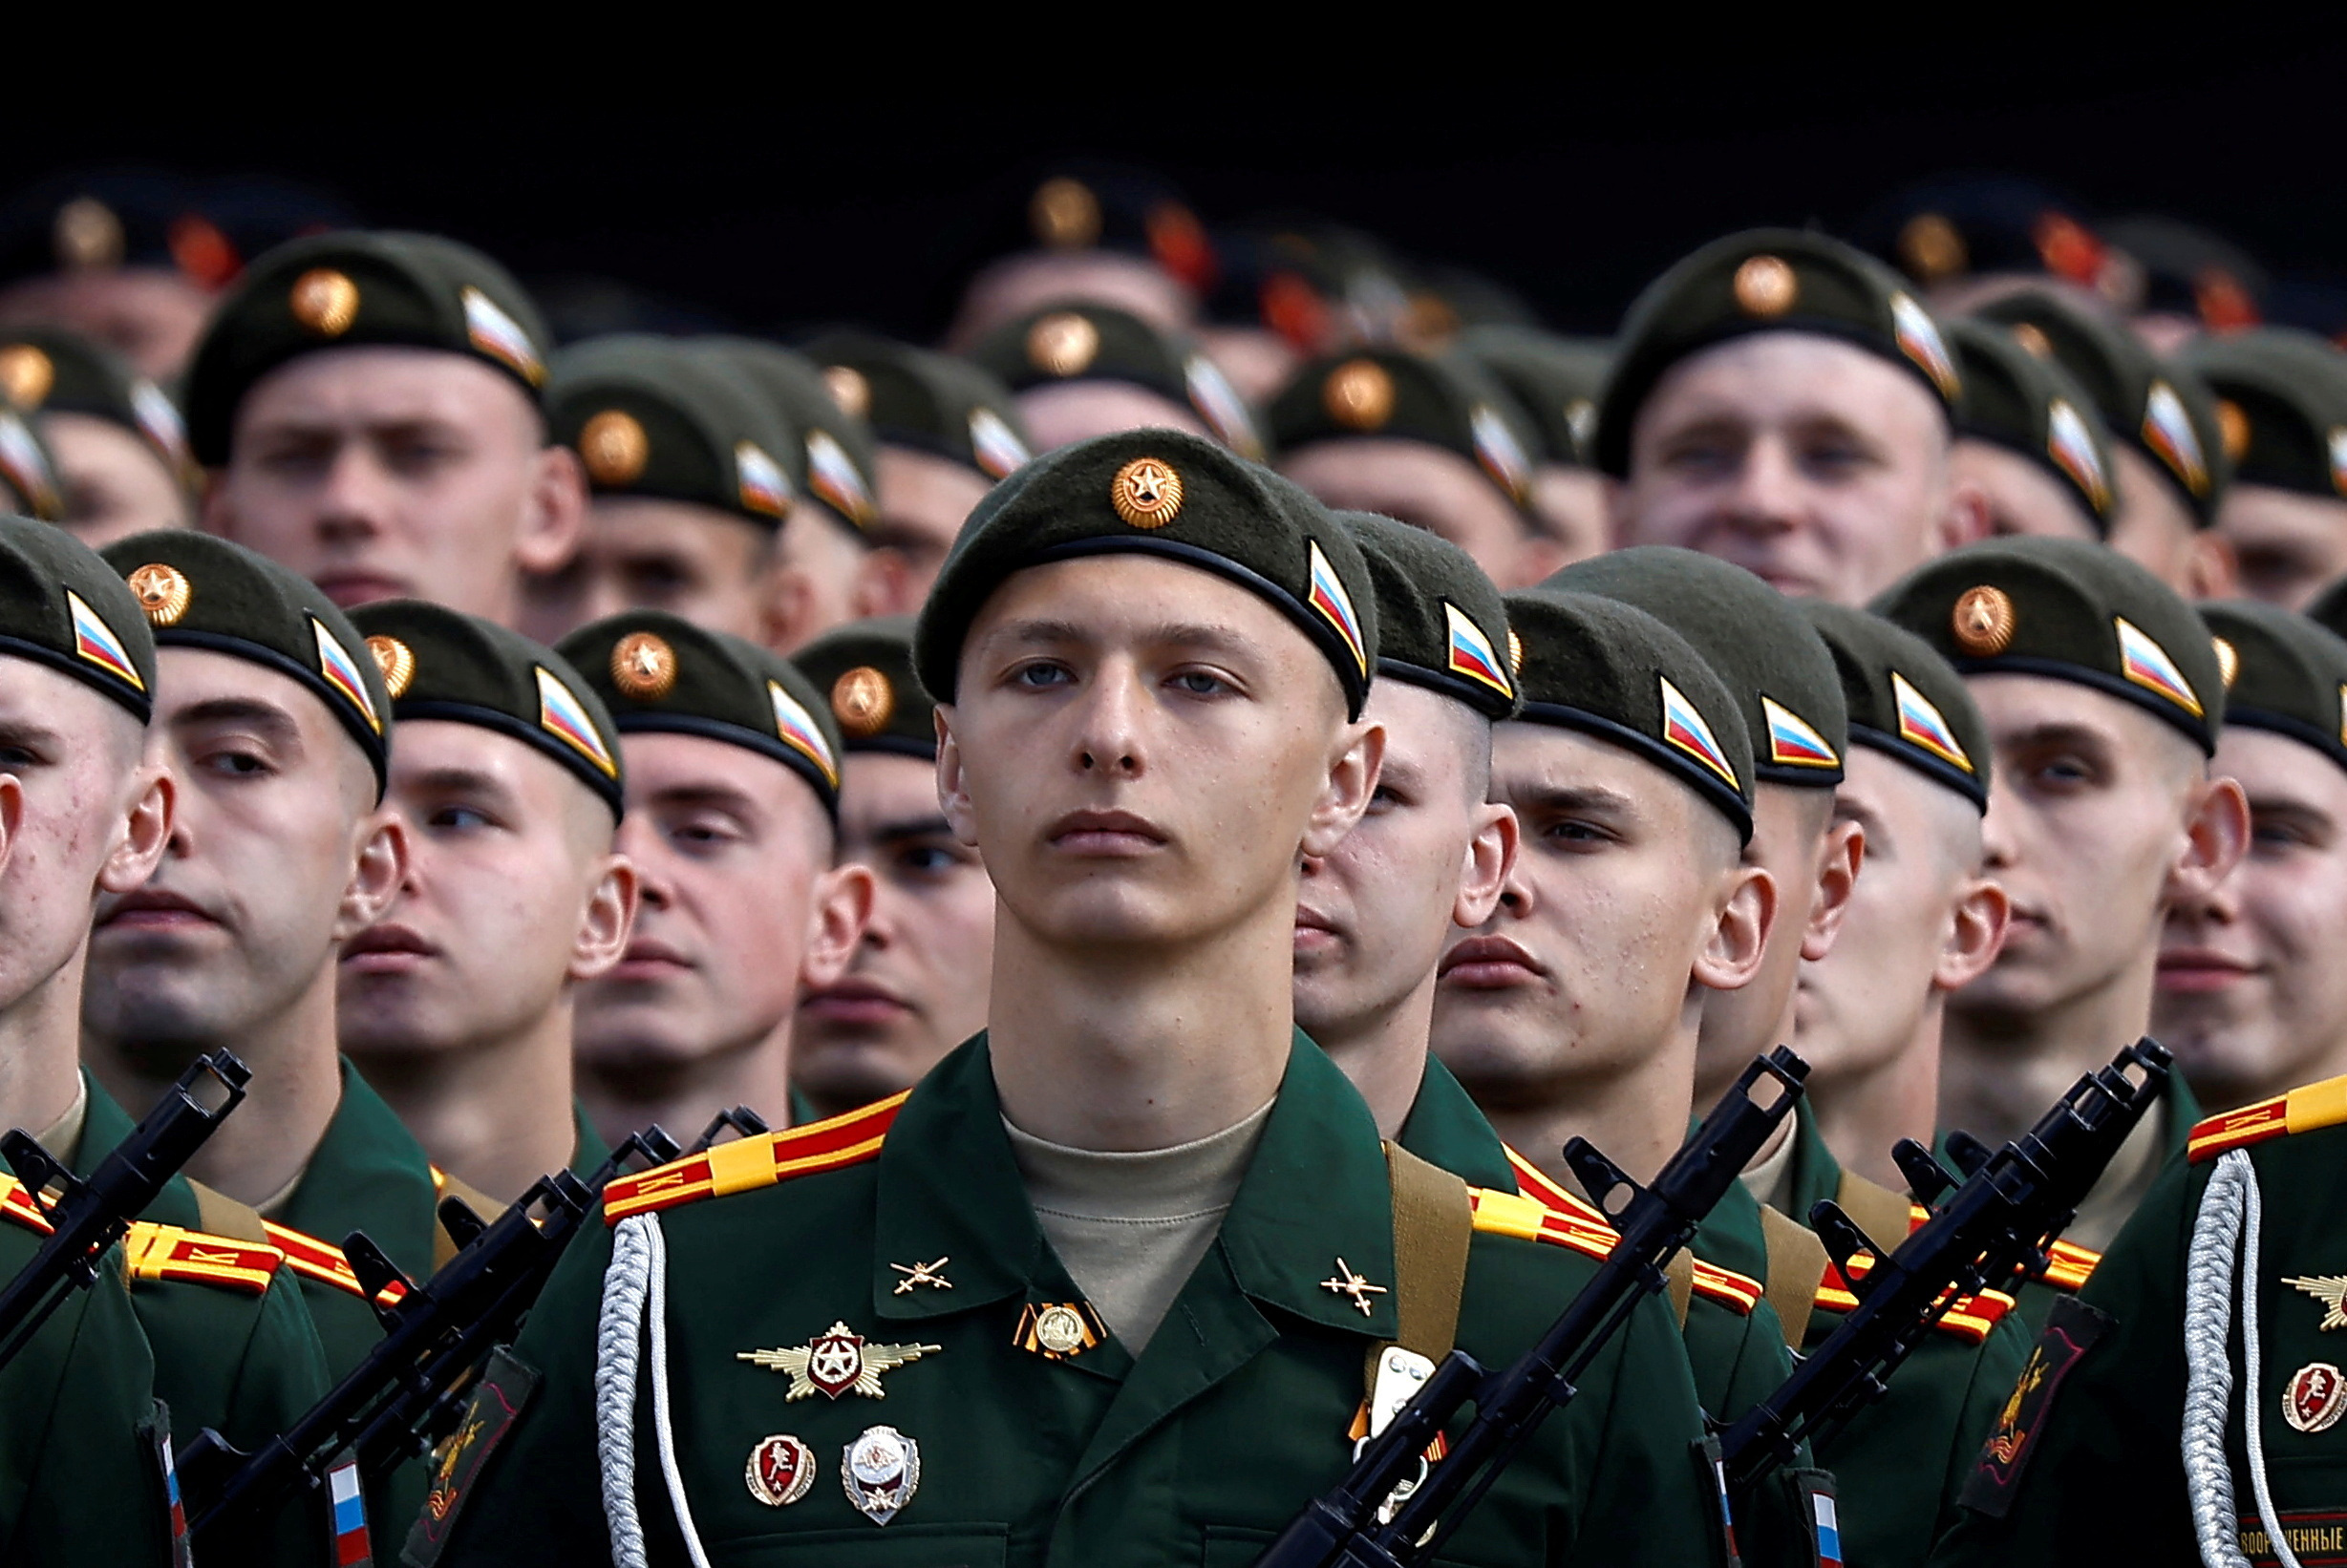 Russia increases maximum size of armed forces by 170,000 servicemen